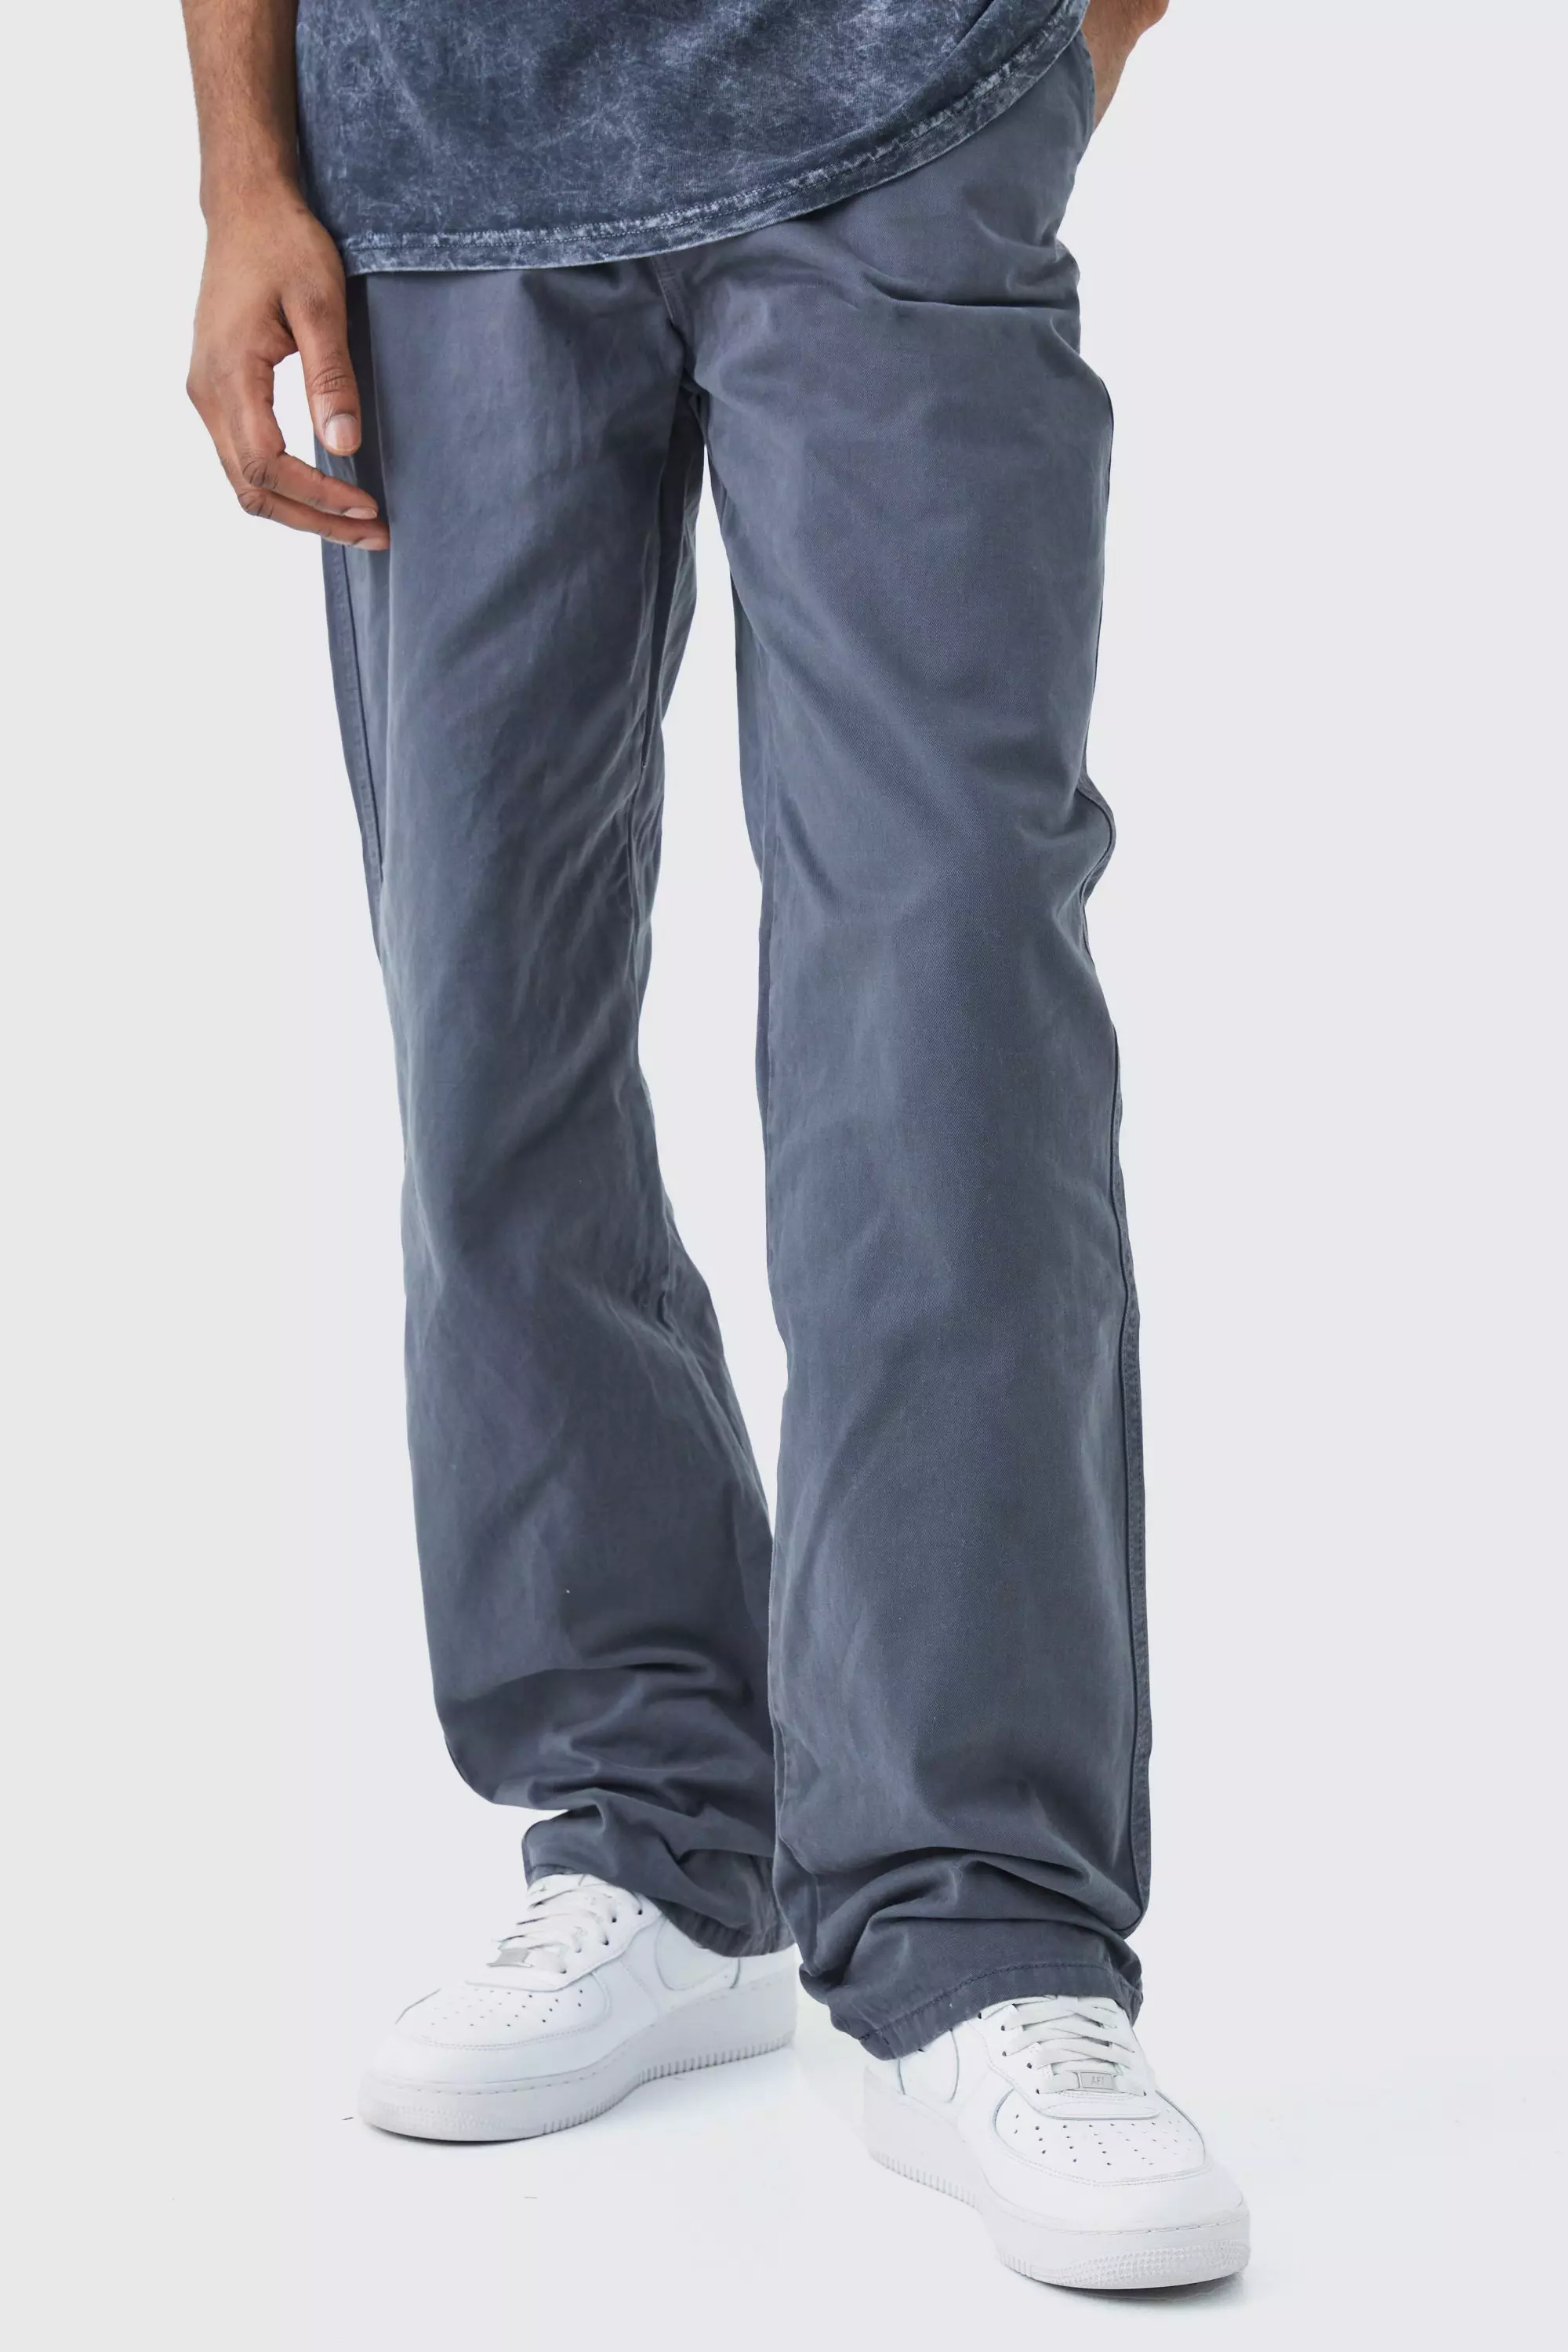 Tall Relaxed Chino Pants Charcoal